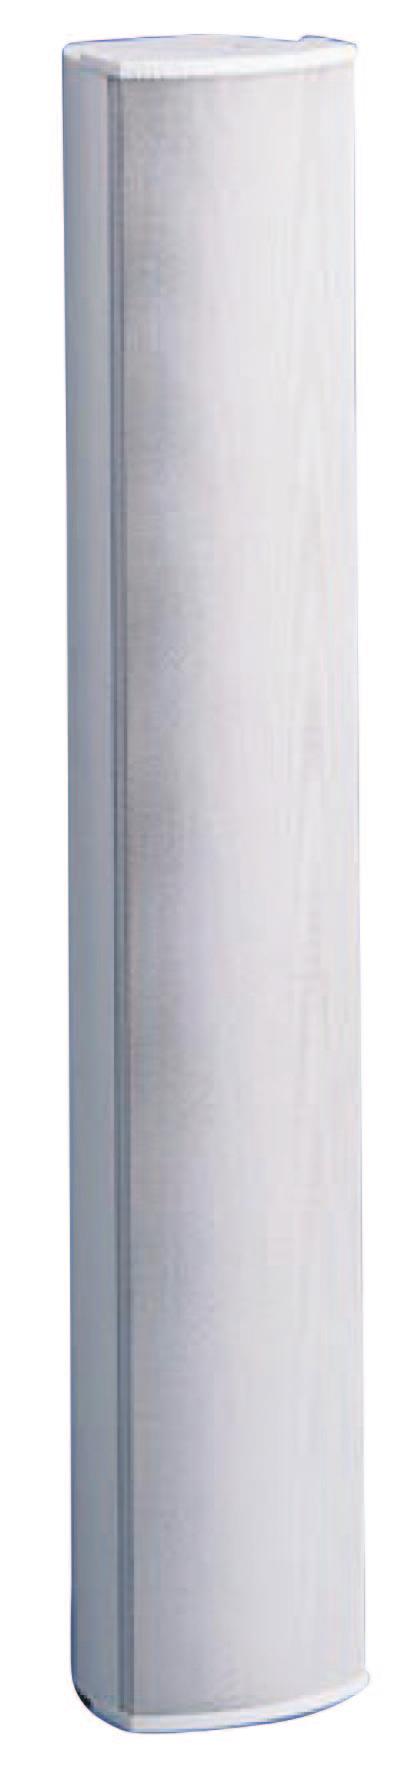 Public Address - Voice Alarm MCS80/TC Metal Column ELECTRICAL Rated power, Watts: 80 Tappings 100 volt line, Watts: 80/40/20/10 Transformer Impedance, Ohms, 100V: 125/250/500/1k Tappings 70.